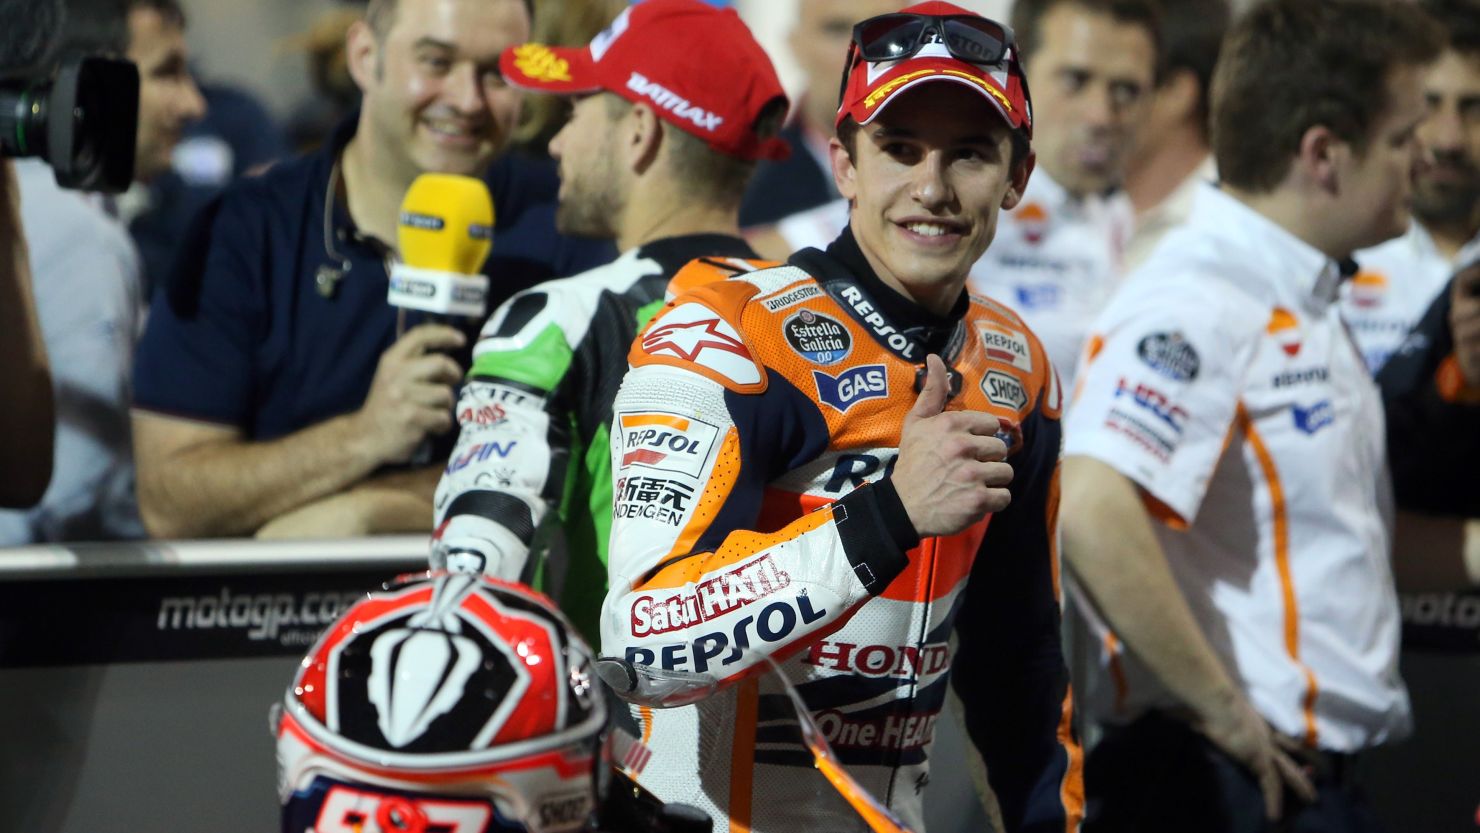 Marc Marquez gives the thumbs up after securing pole for the opening race of the MotoGP season in Qatar.